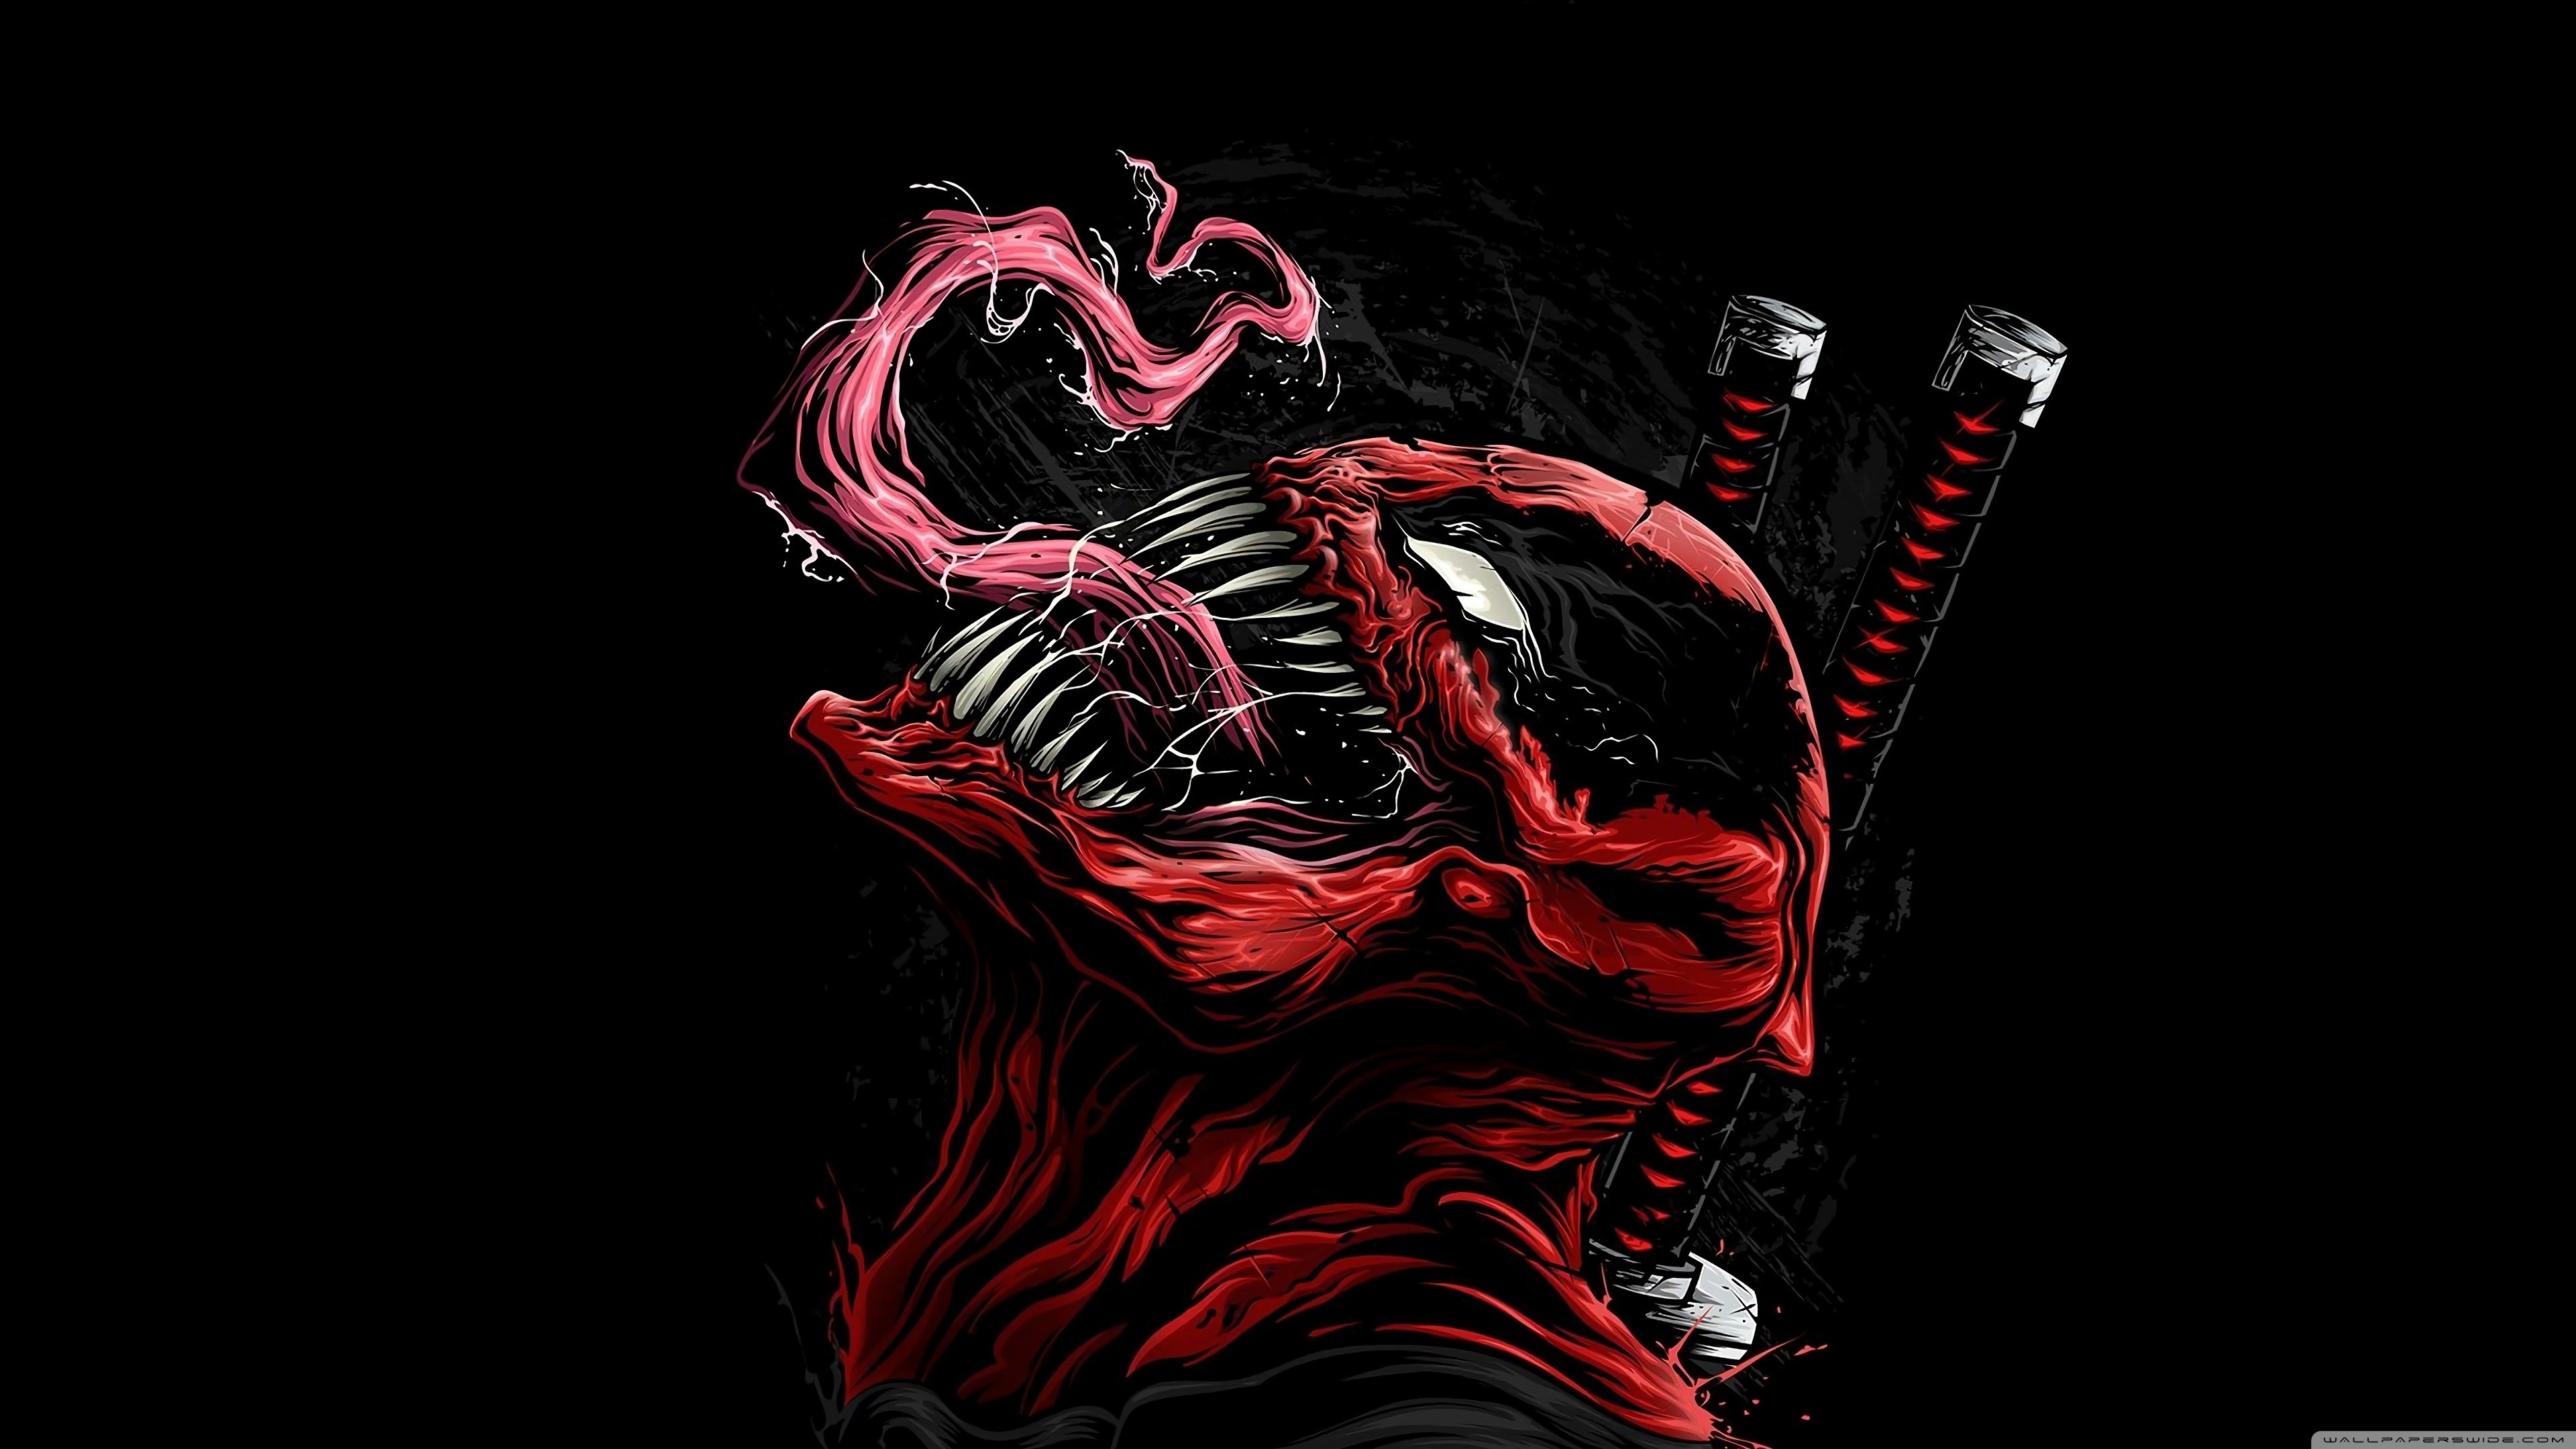 Featured image of post Venom 8K Wallpaper For Mobile / 1440x2560 top venom wallpapers for your iphone wallpaper #venom #wallpaper #iphone #iphonex #marvel #poster #symbiote #sony #fanart #tumblr #spiderman #funny.